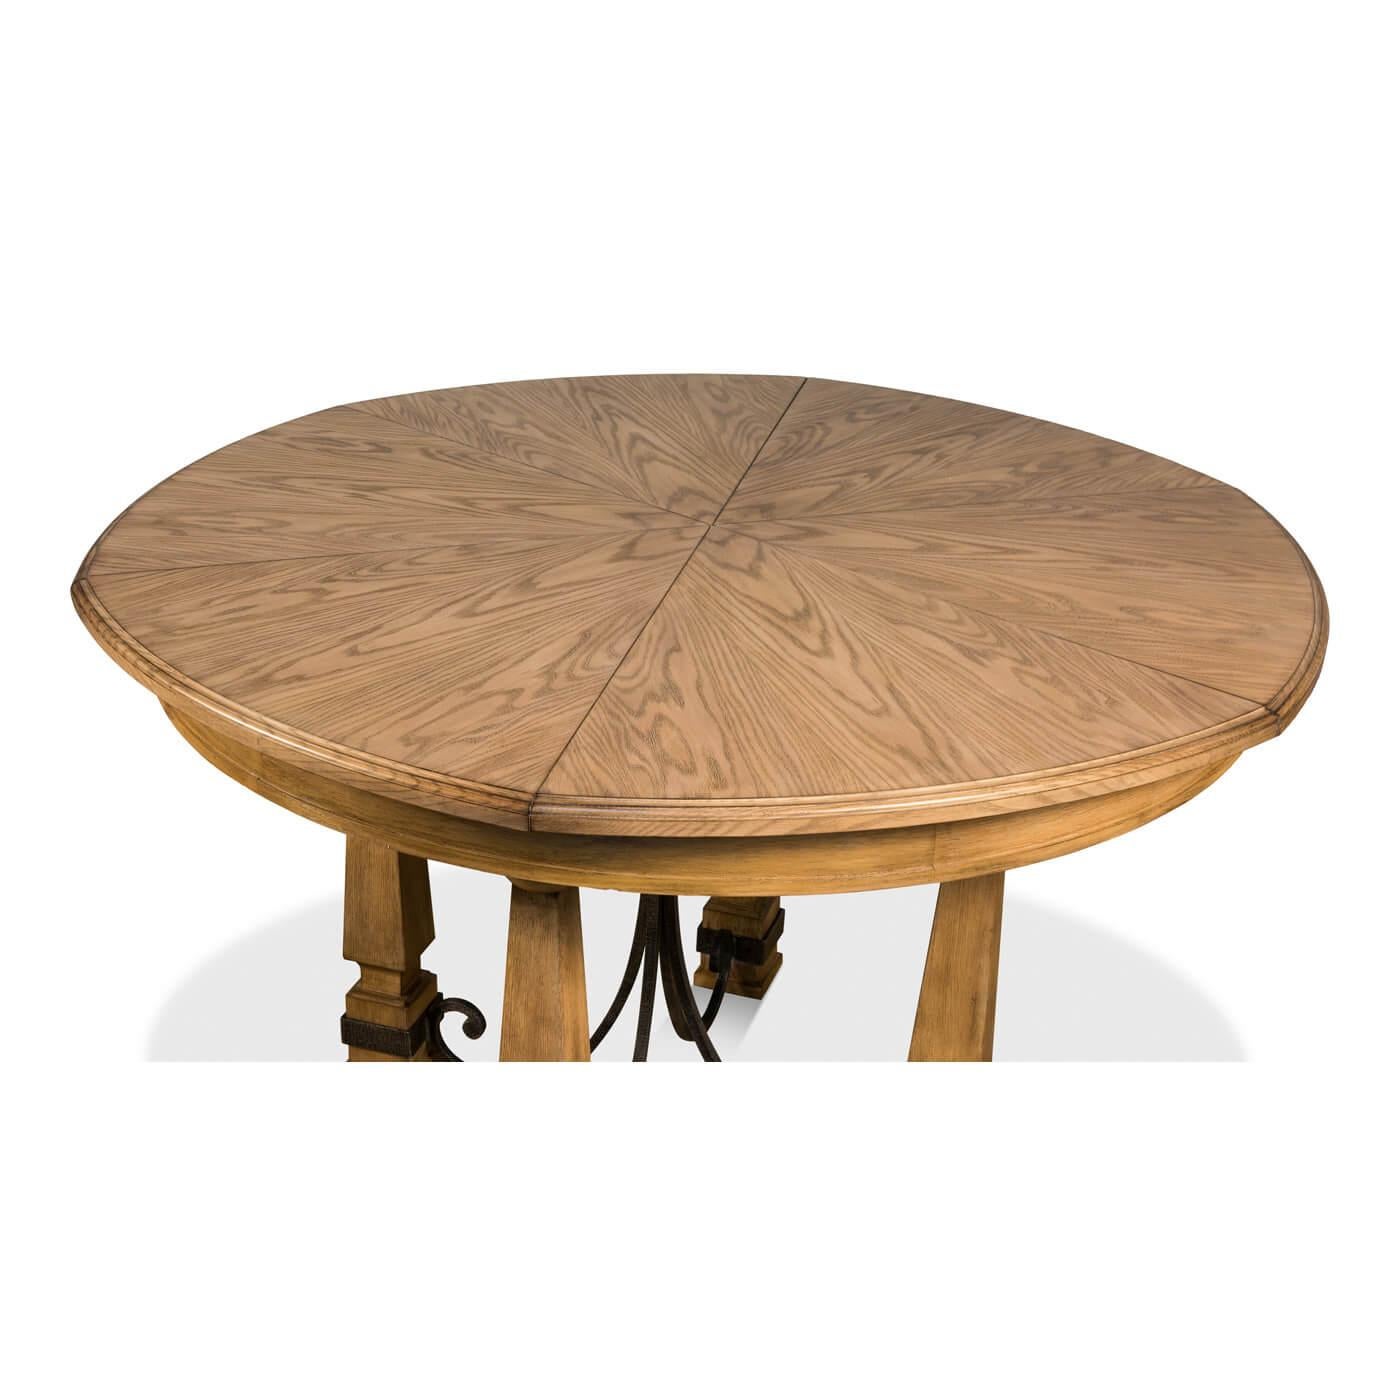 Asian Arts & Crafts-Style Round Dining Table